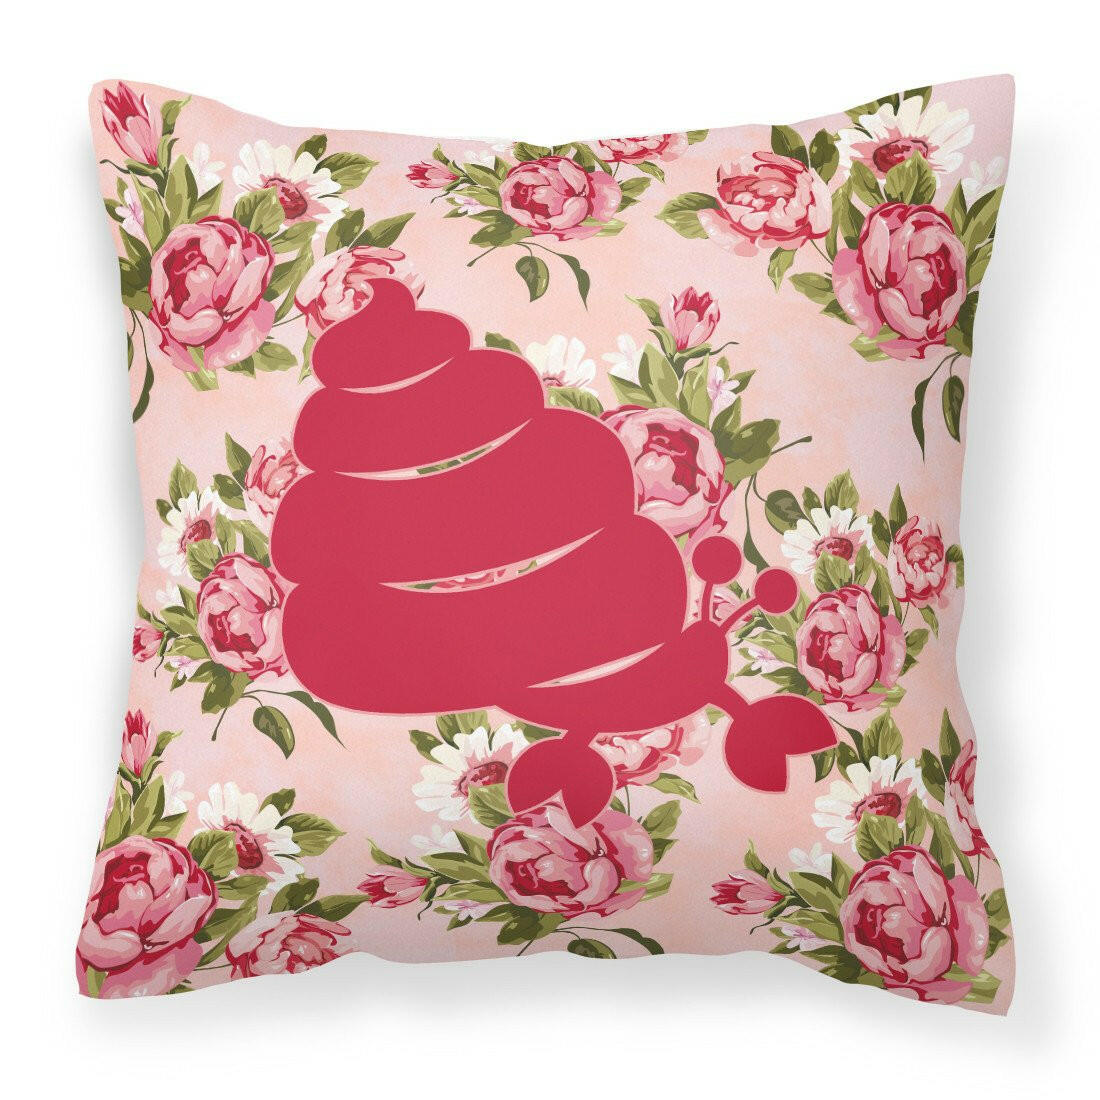 Hermit Crab Shabby Chic Pink Roses  Fabric Decorative Pillow BB1092-RS-PK-PW1414 - the-store.com